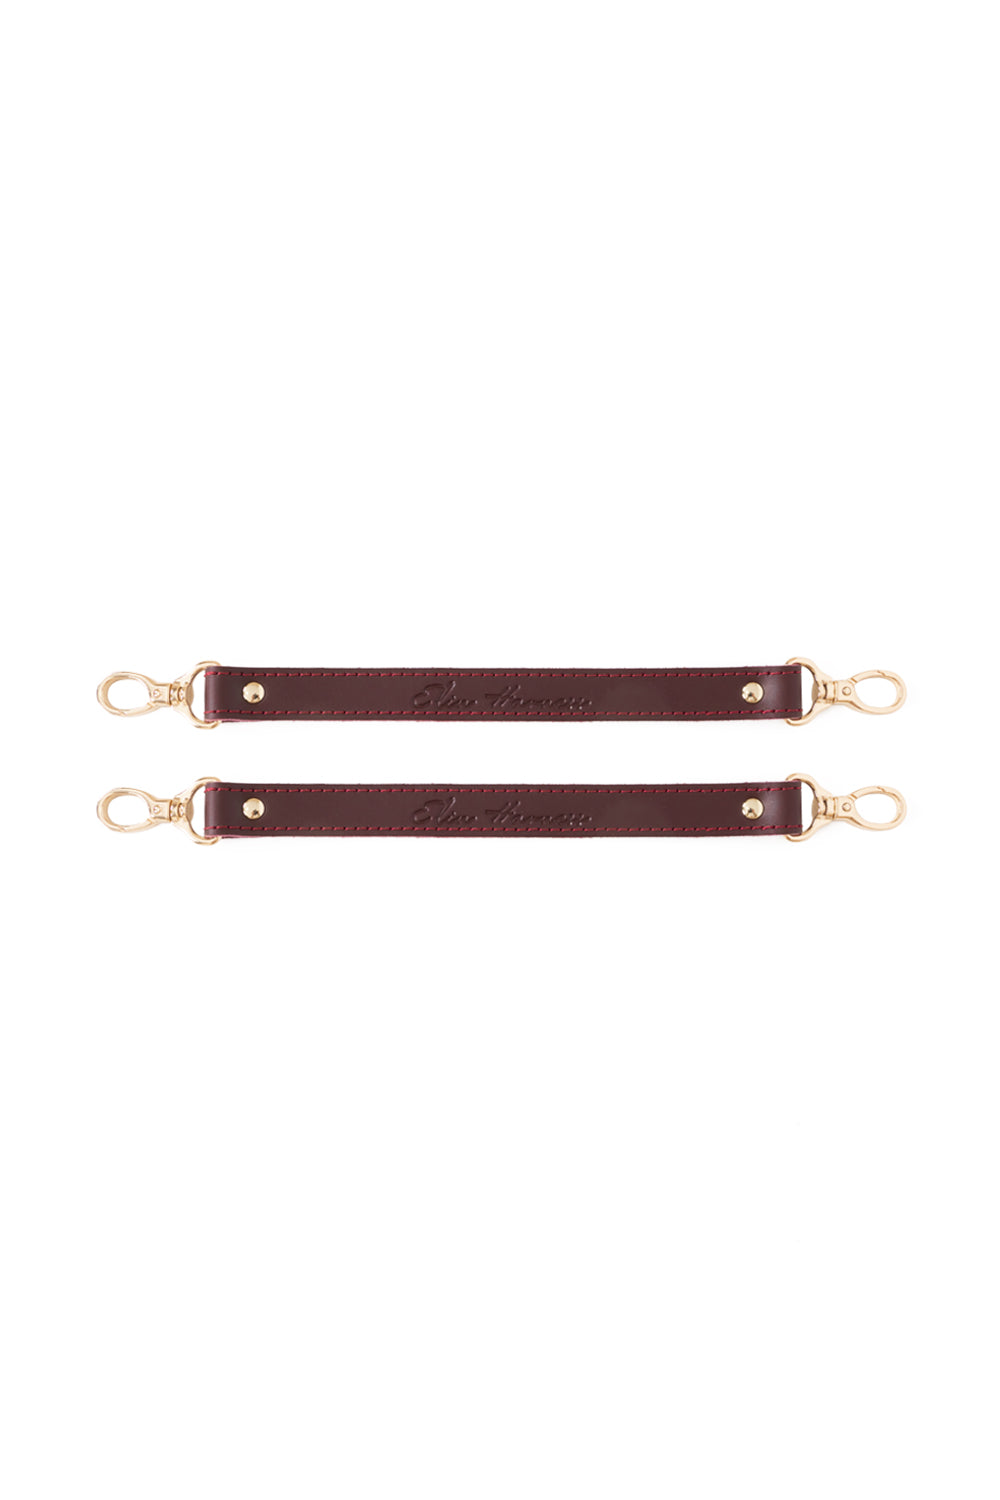 2-Way Extended Leather Connector. Set of 2 Straps for Fixation